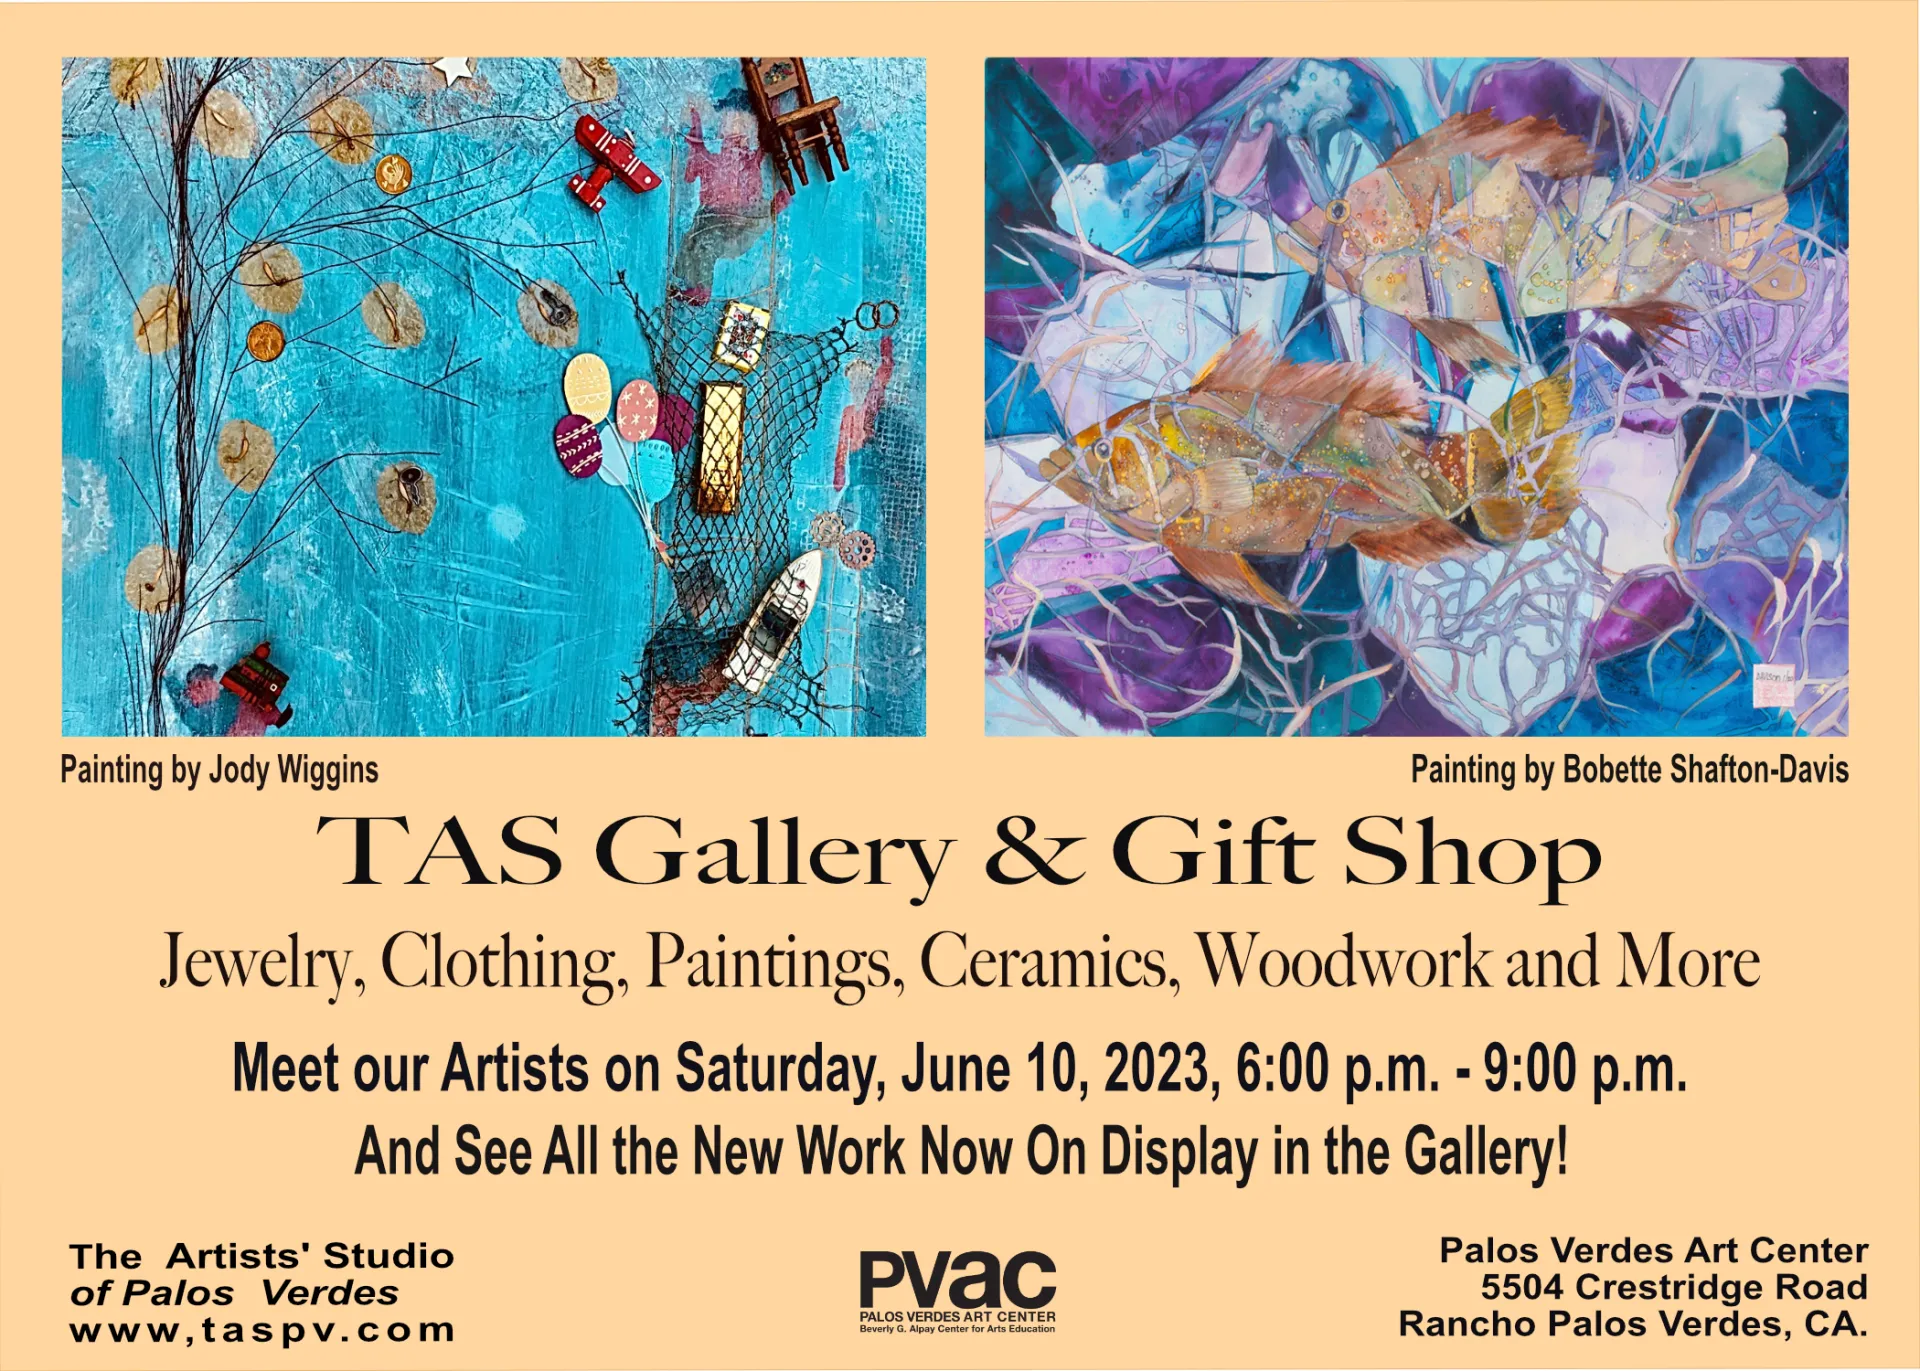 Stop by and meet our artists (of The Artists’ Studio of Palos Verdes -TAS) who will be hosting the TAS Gallery & Gift Shop on Saturday, June 10, 2023, 6:00 p.m. - 9:00 p.m. We are located at the Palos Verdes Art Center, 5504 Crestridge Road, Rancho Palos Verdes, CA. Don’t miss the new artwork now on display in our gallery/shop.